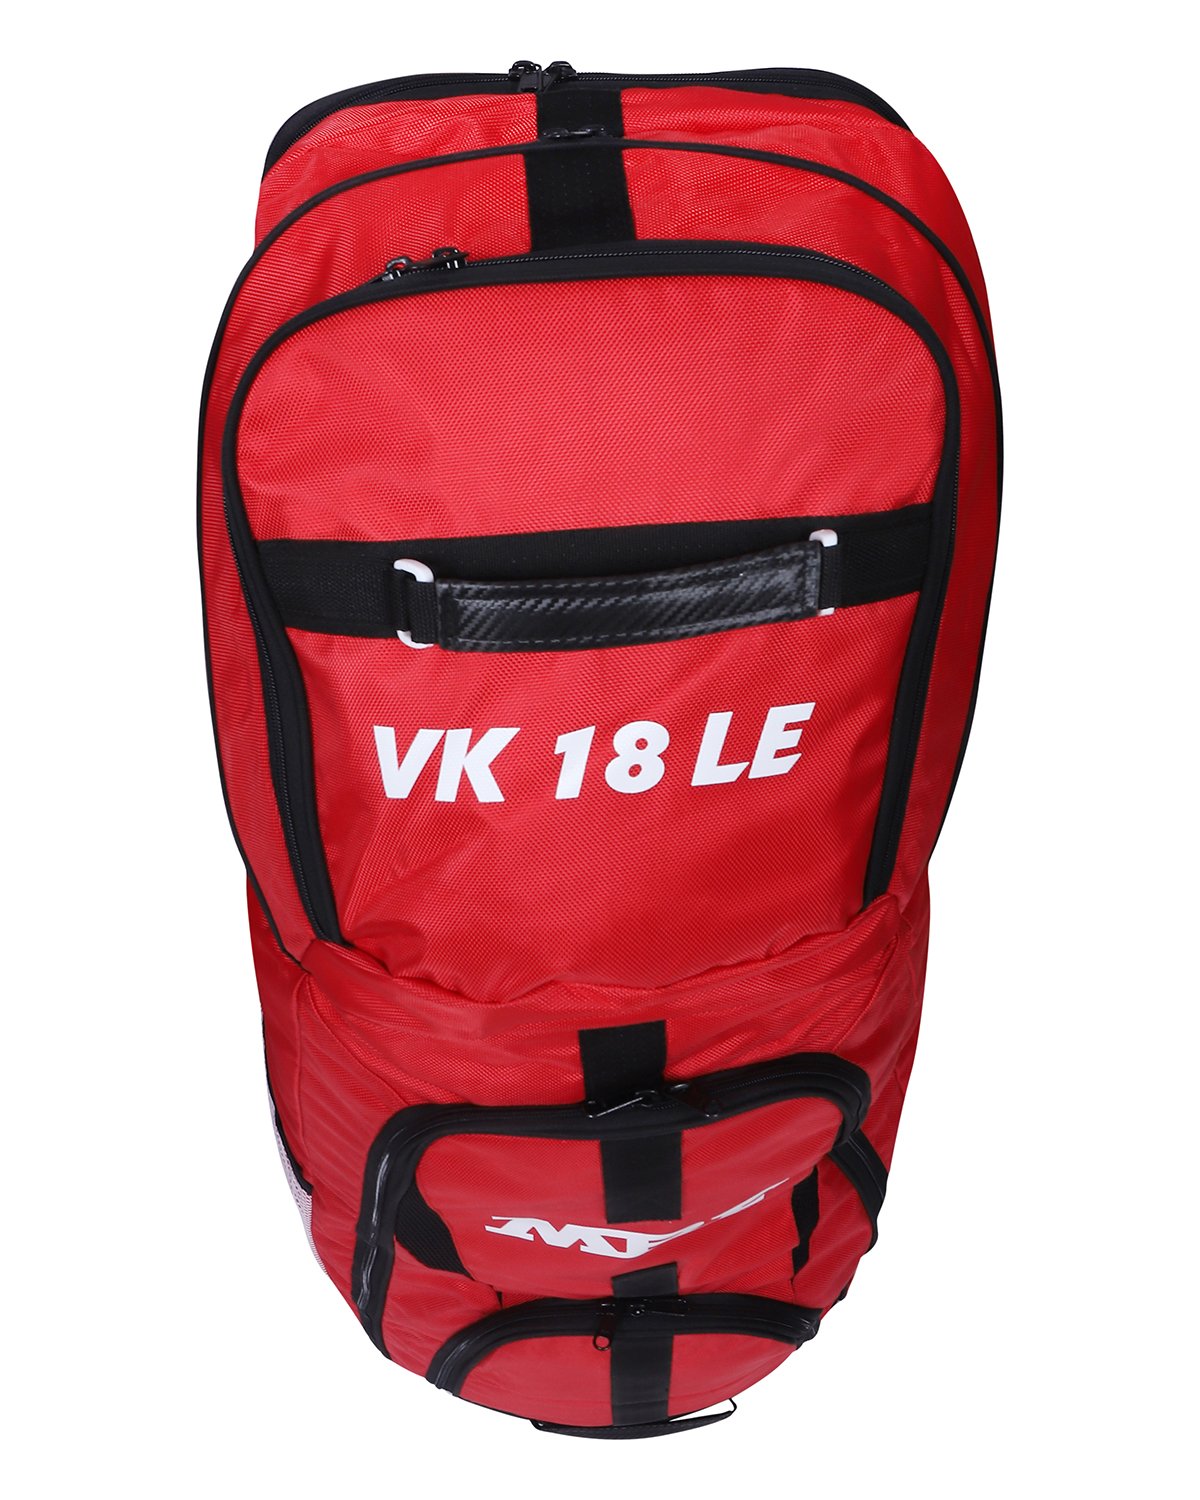 MRF Warrior Kit Bag - The Cricket Square - Leading Online Store for Cricket  Bats and Accessories